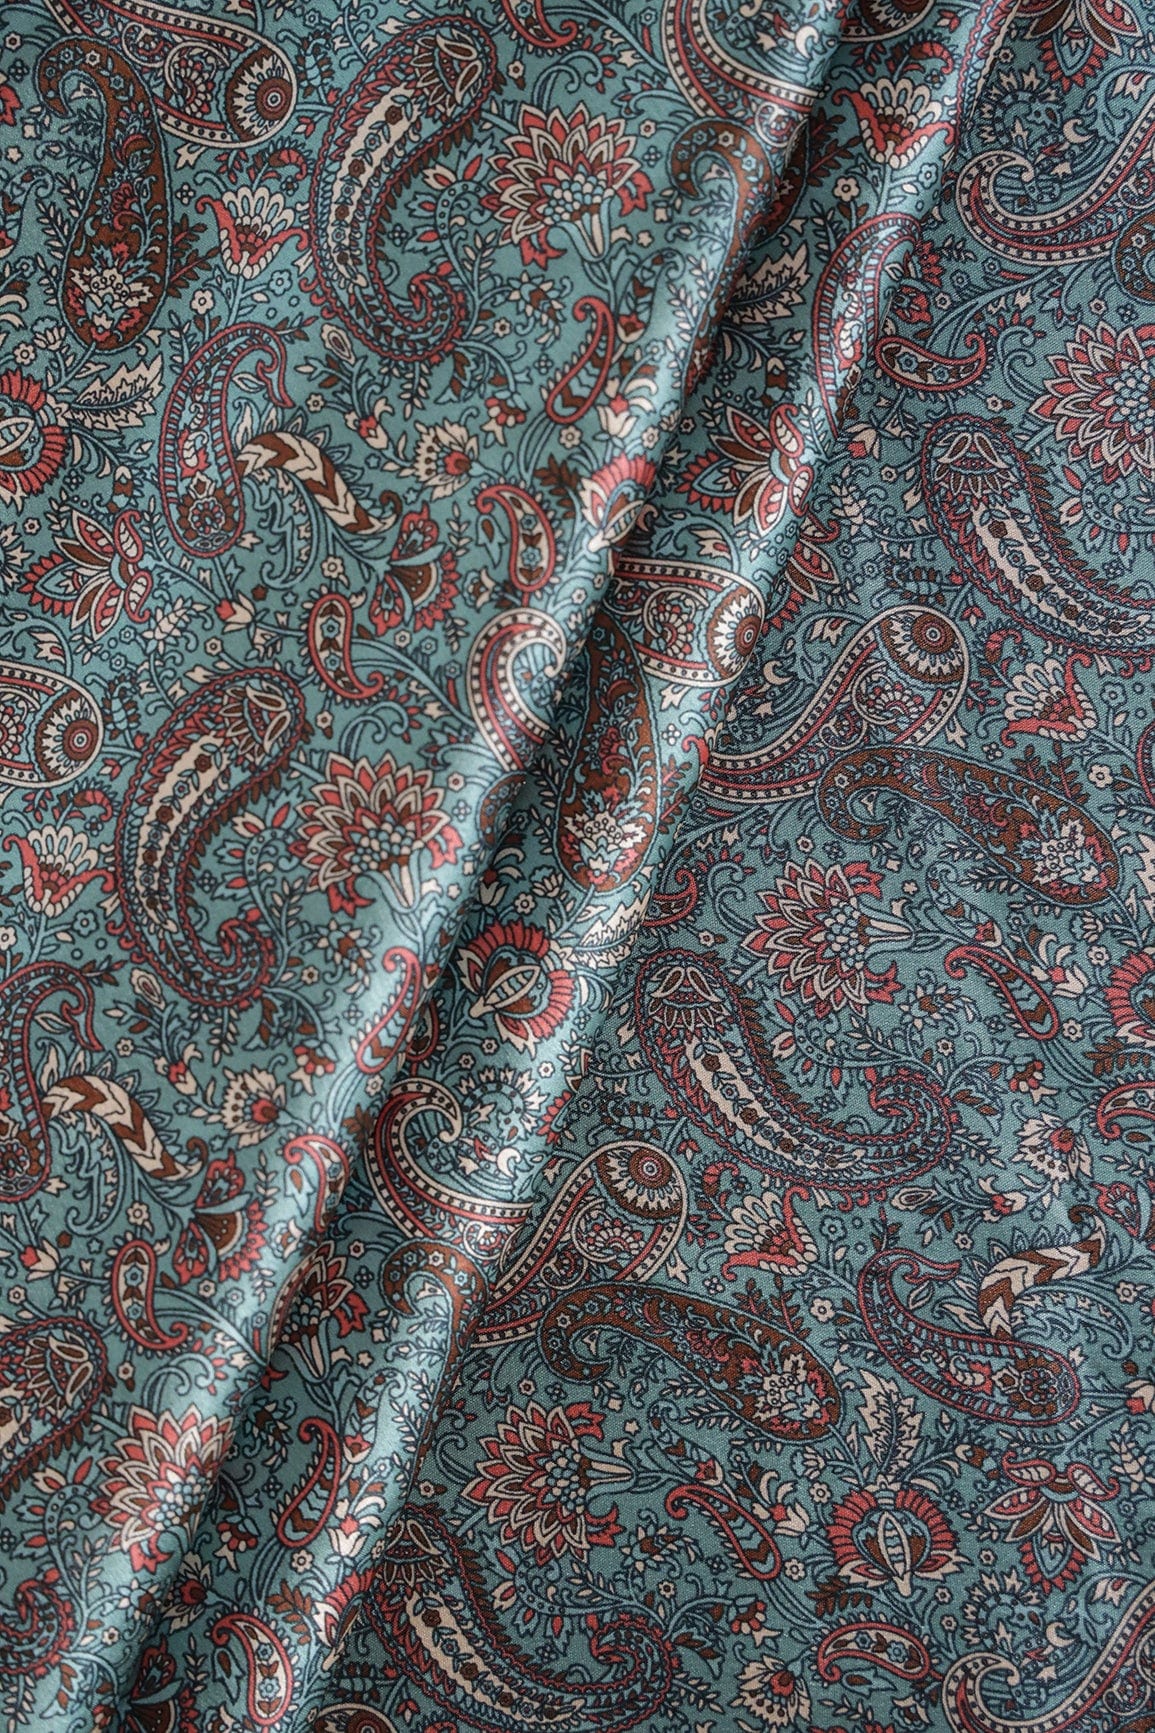 doeraa Prints Red And Teal Paisley Pattern Digital Print On Satin Fabric